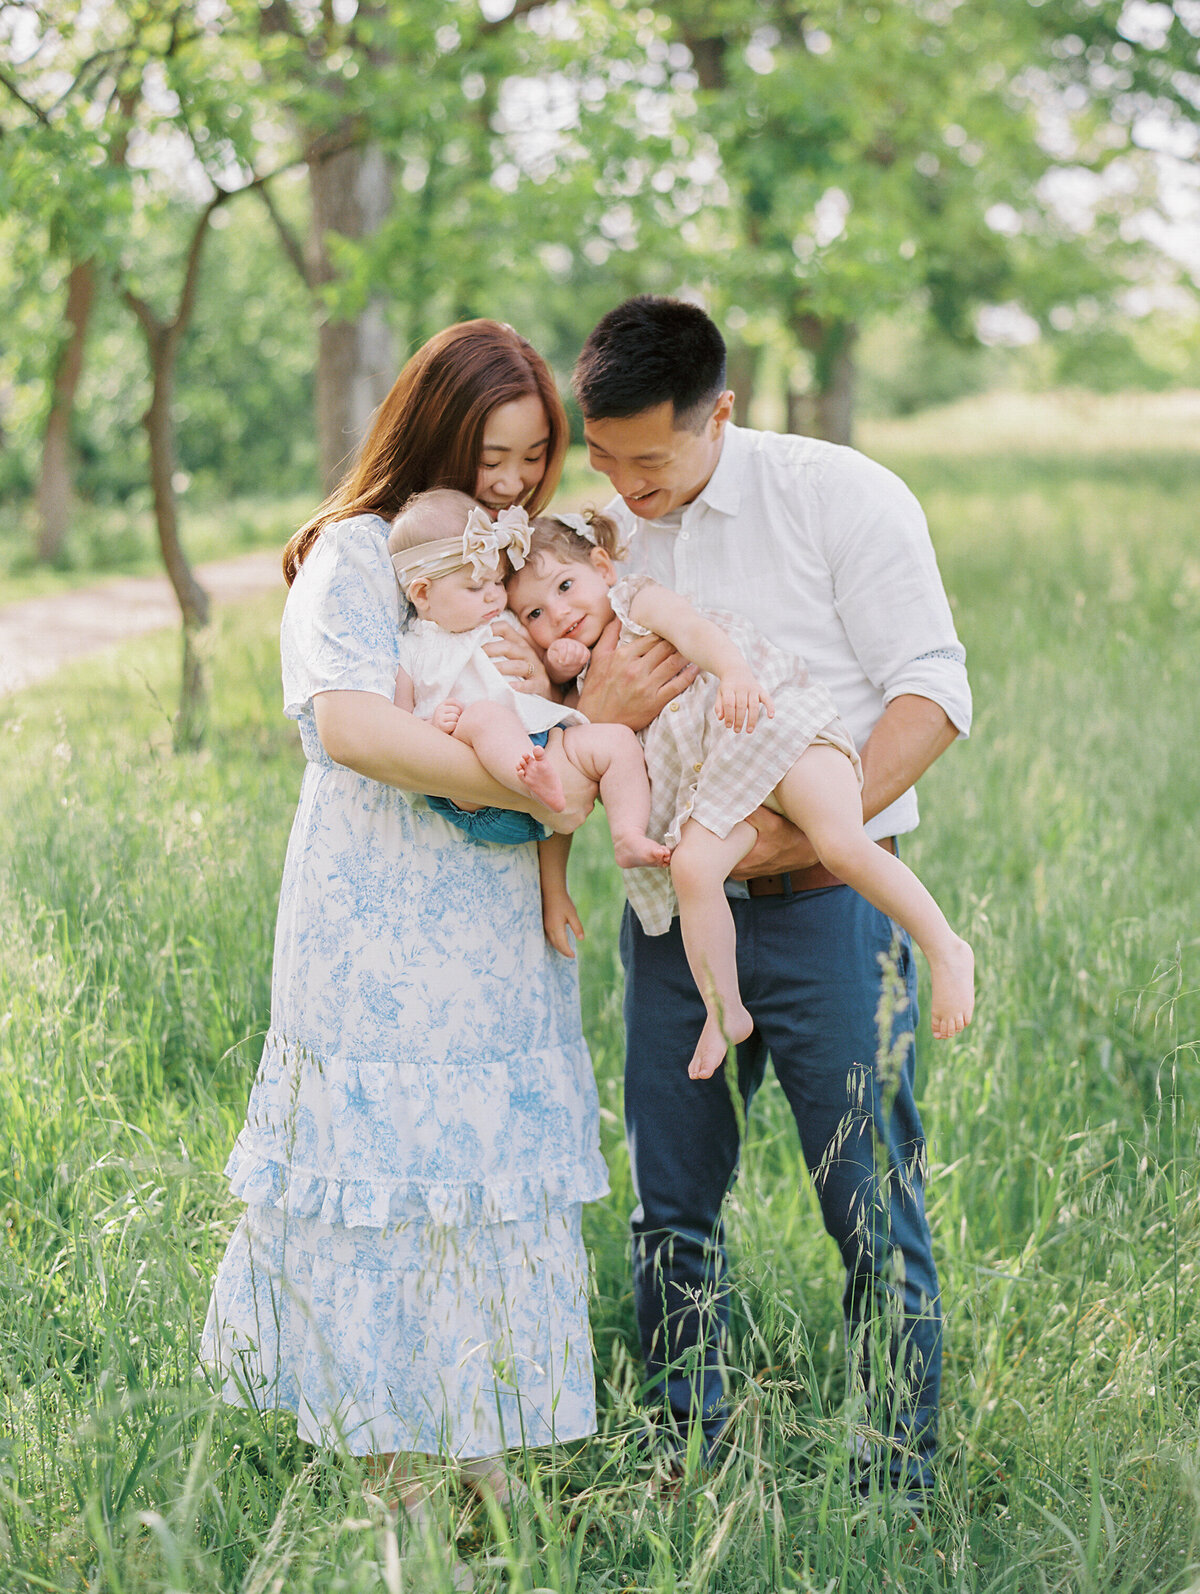 Mom and dad holding their two little girls in a green grassy field